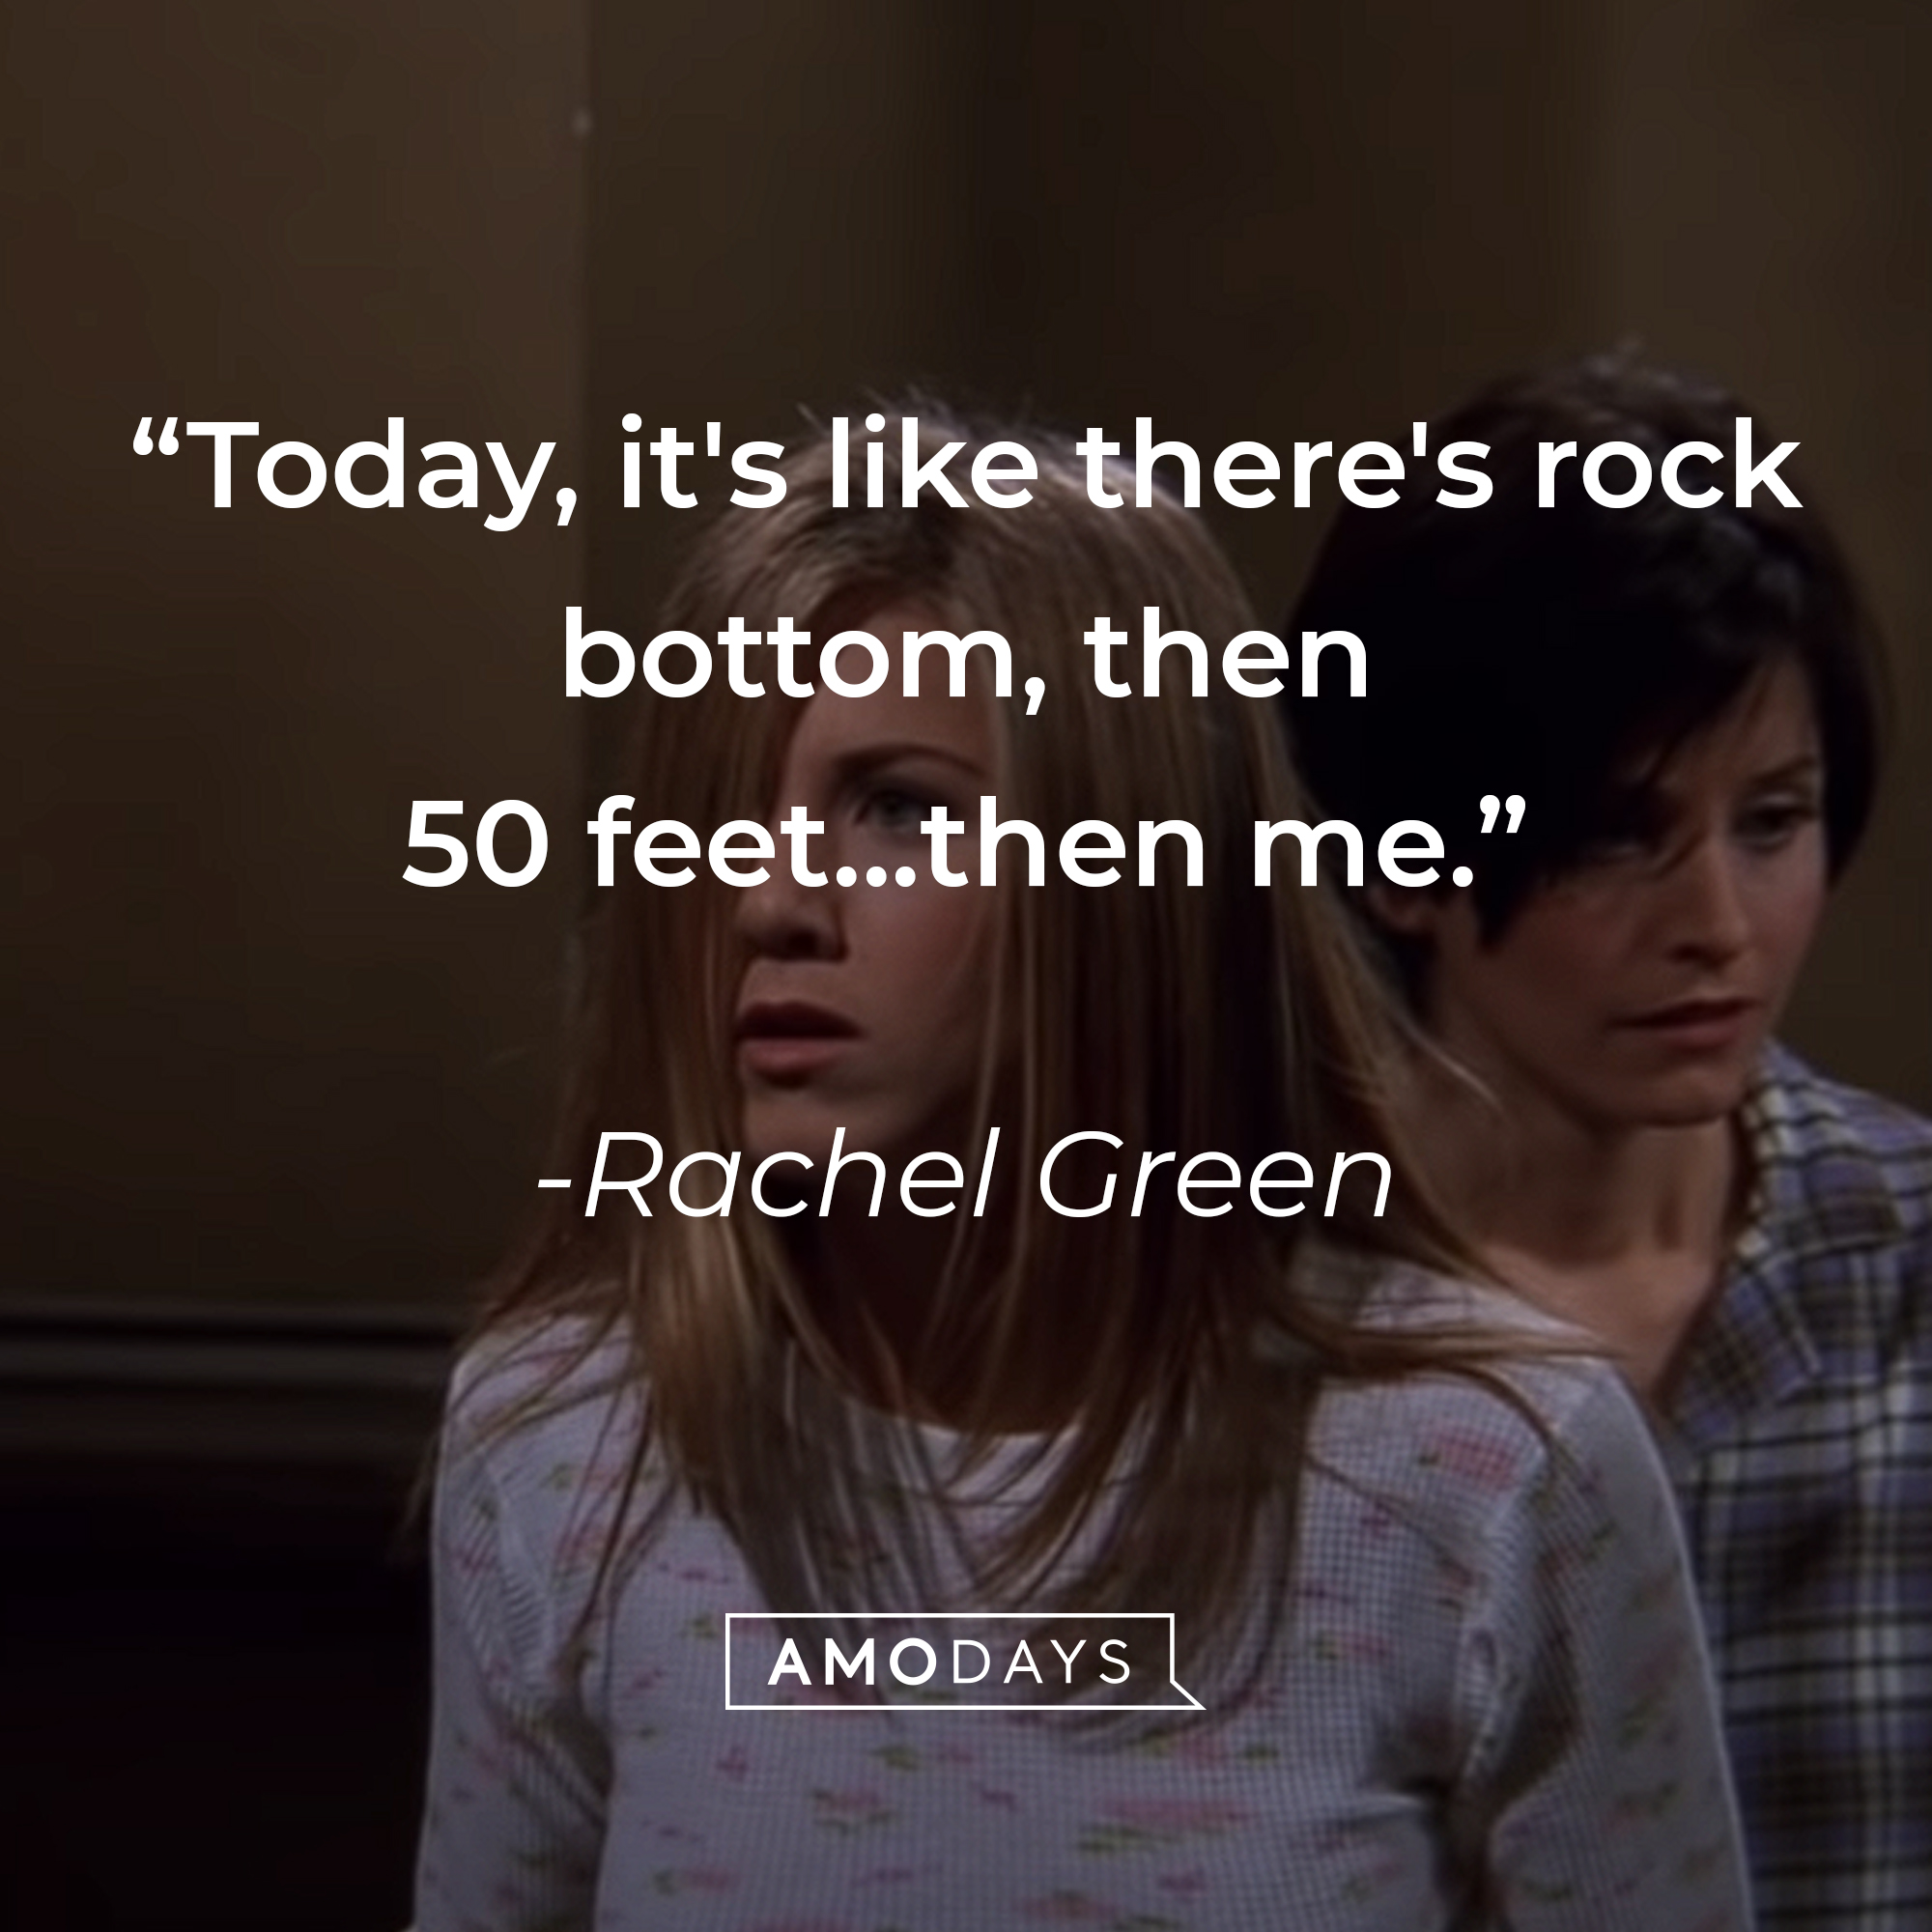 Rachel Green's quote: "Today, it's like there's rock bottom, then 50 feet...then me." | Source: youtube.com/warnerbrostv